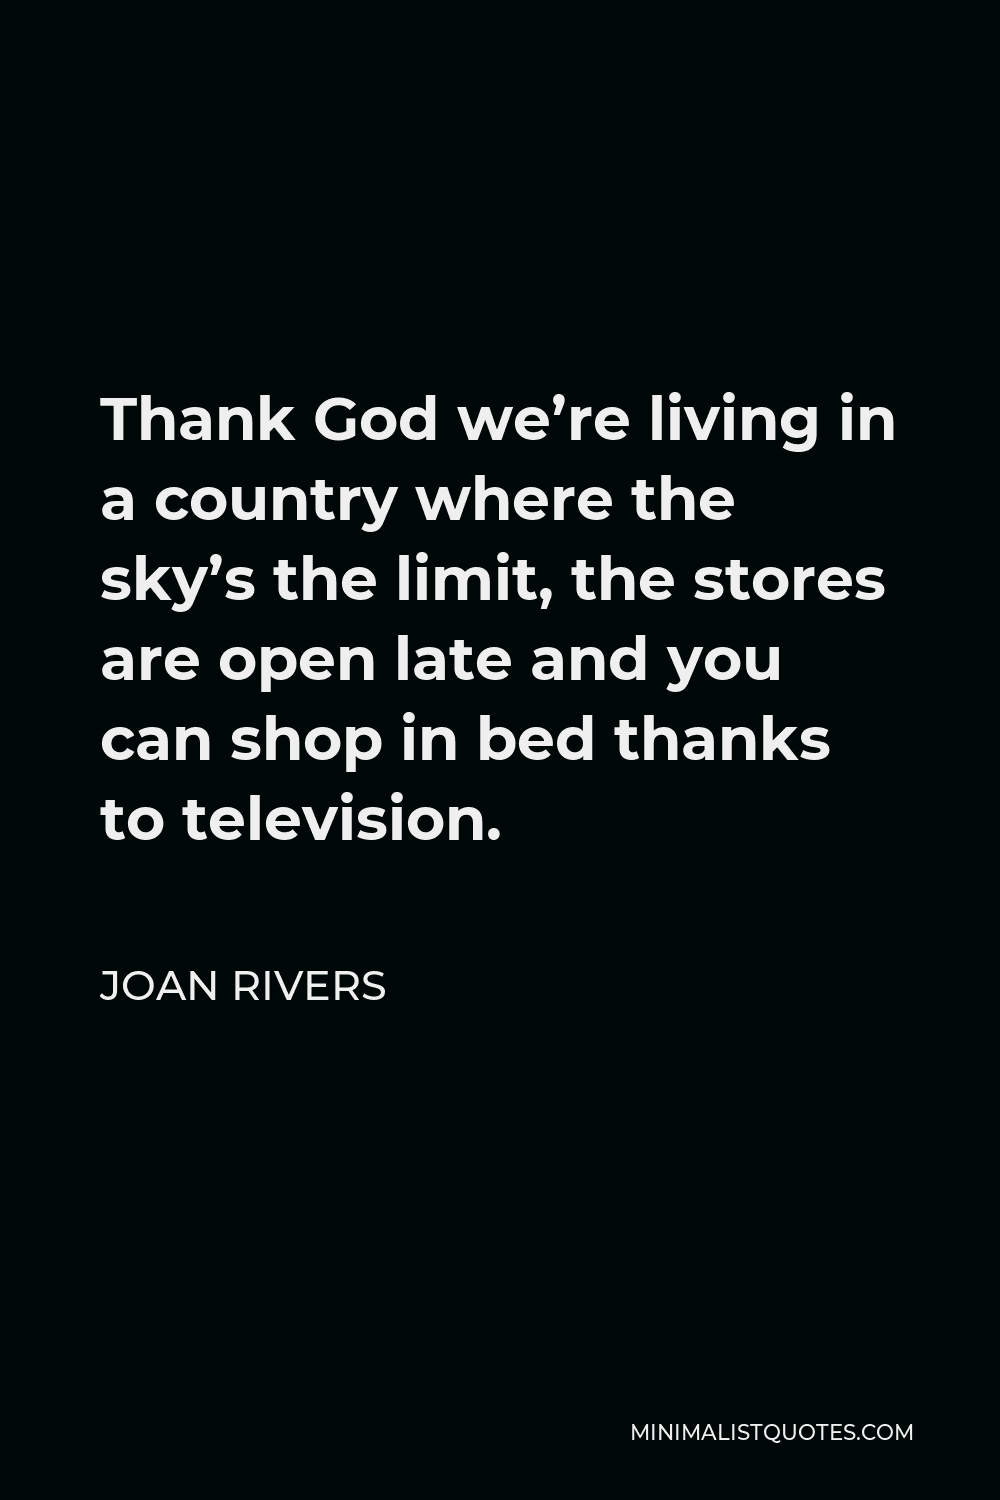 Joan Rivers Quote - Thank God we’re living in a country where the sky’s the limit, the stores are open late and you can shop in bed thanks to television.